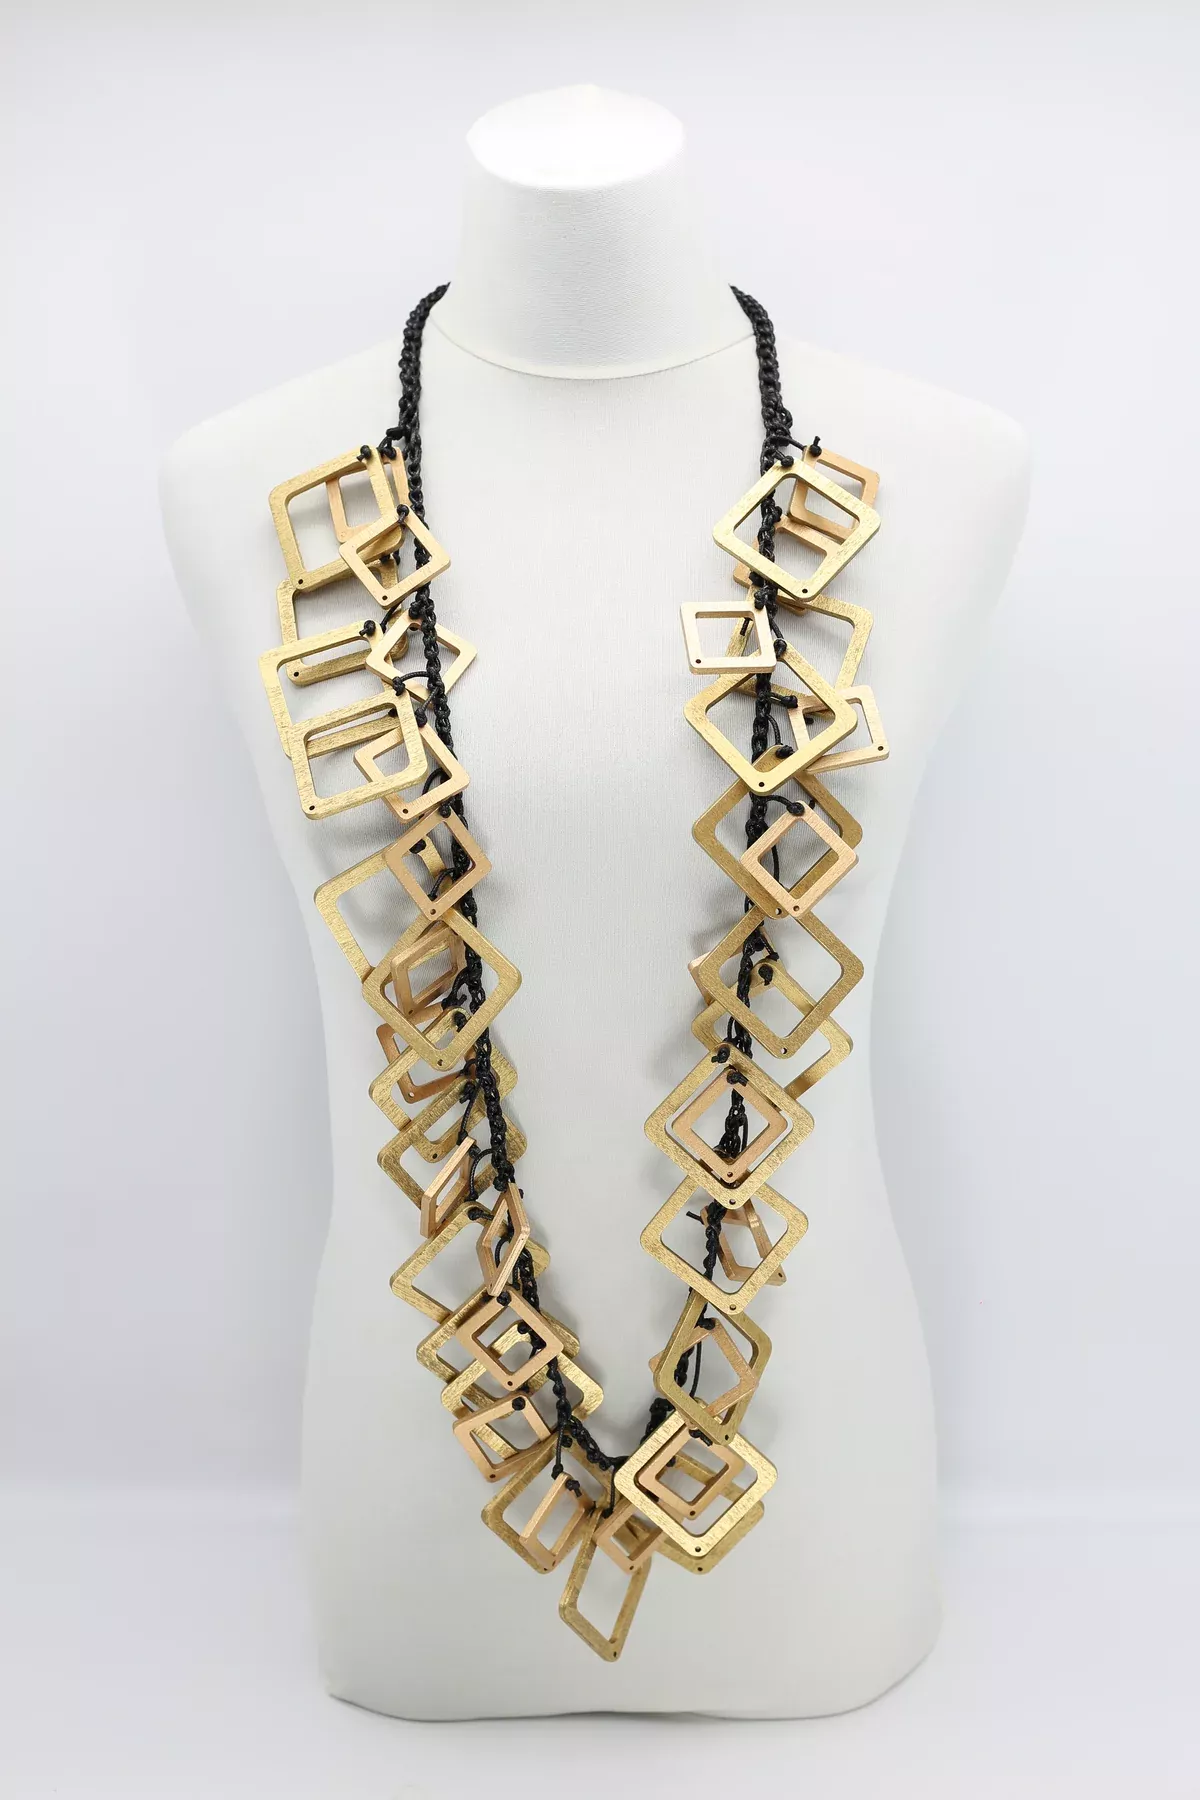 Exploring the Beauty of Geometric Shapes in Necklaces